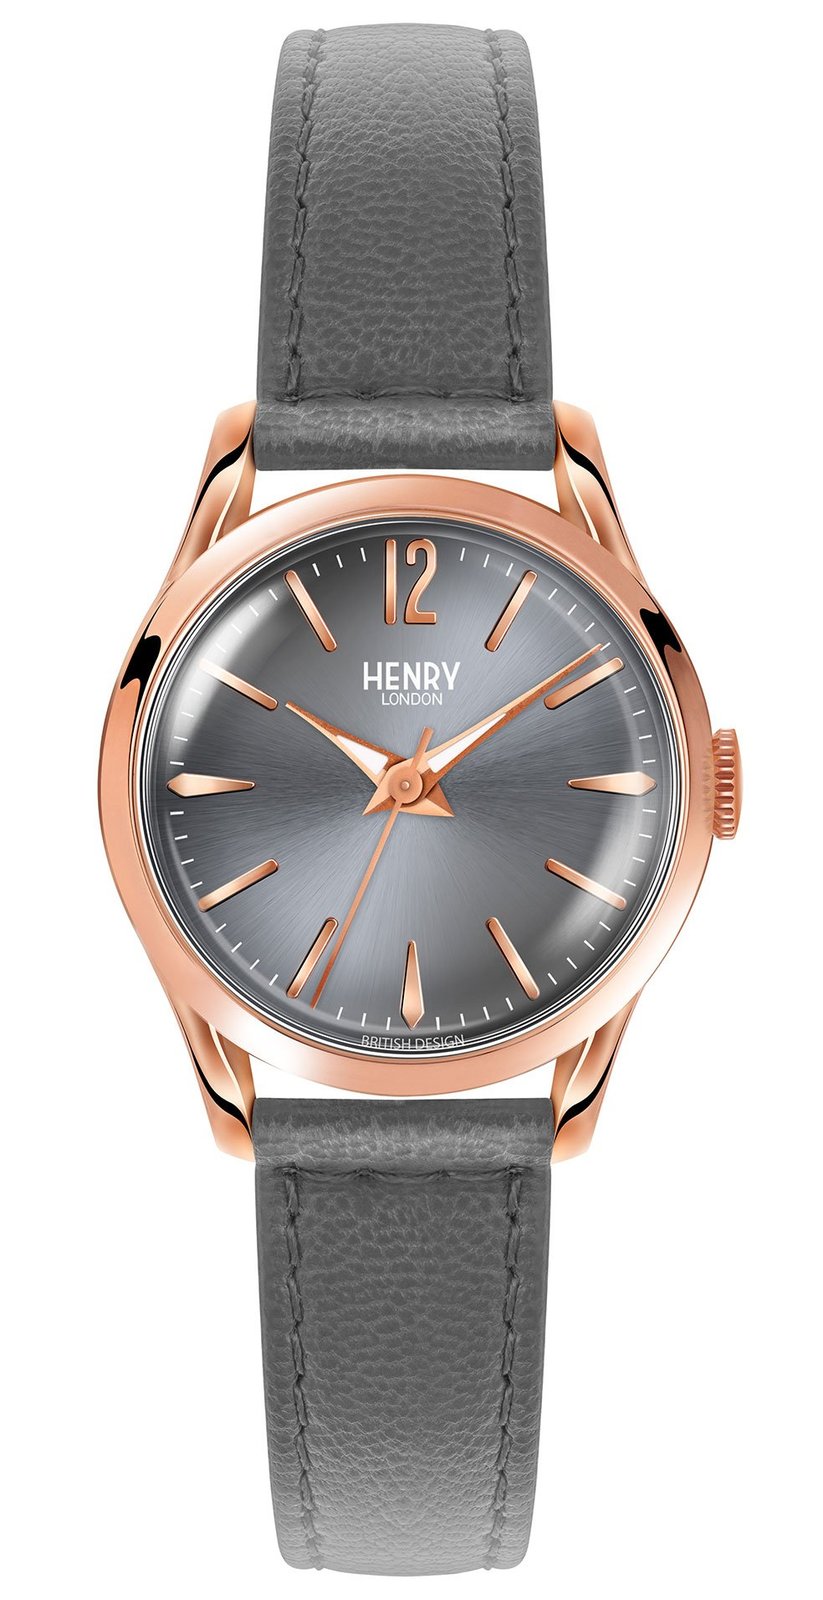 Primary image for Henry London HL25-S-0194 Finchley Ladies Grey Watch